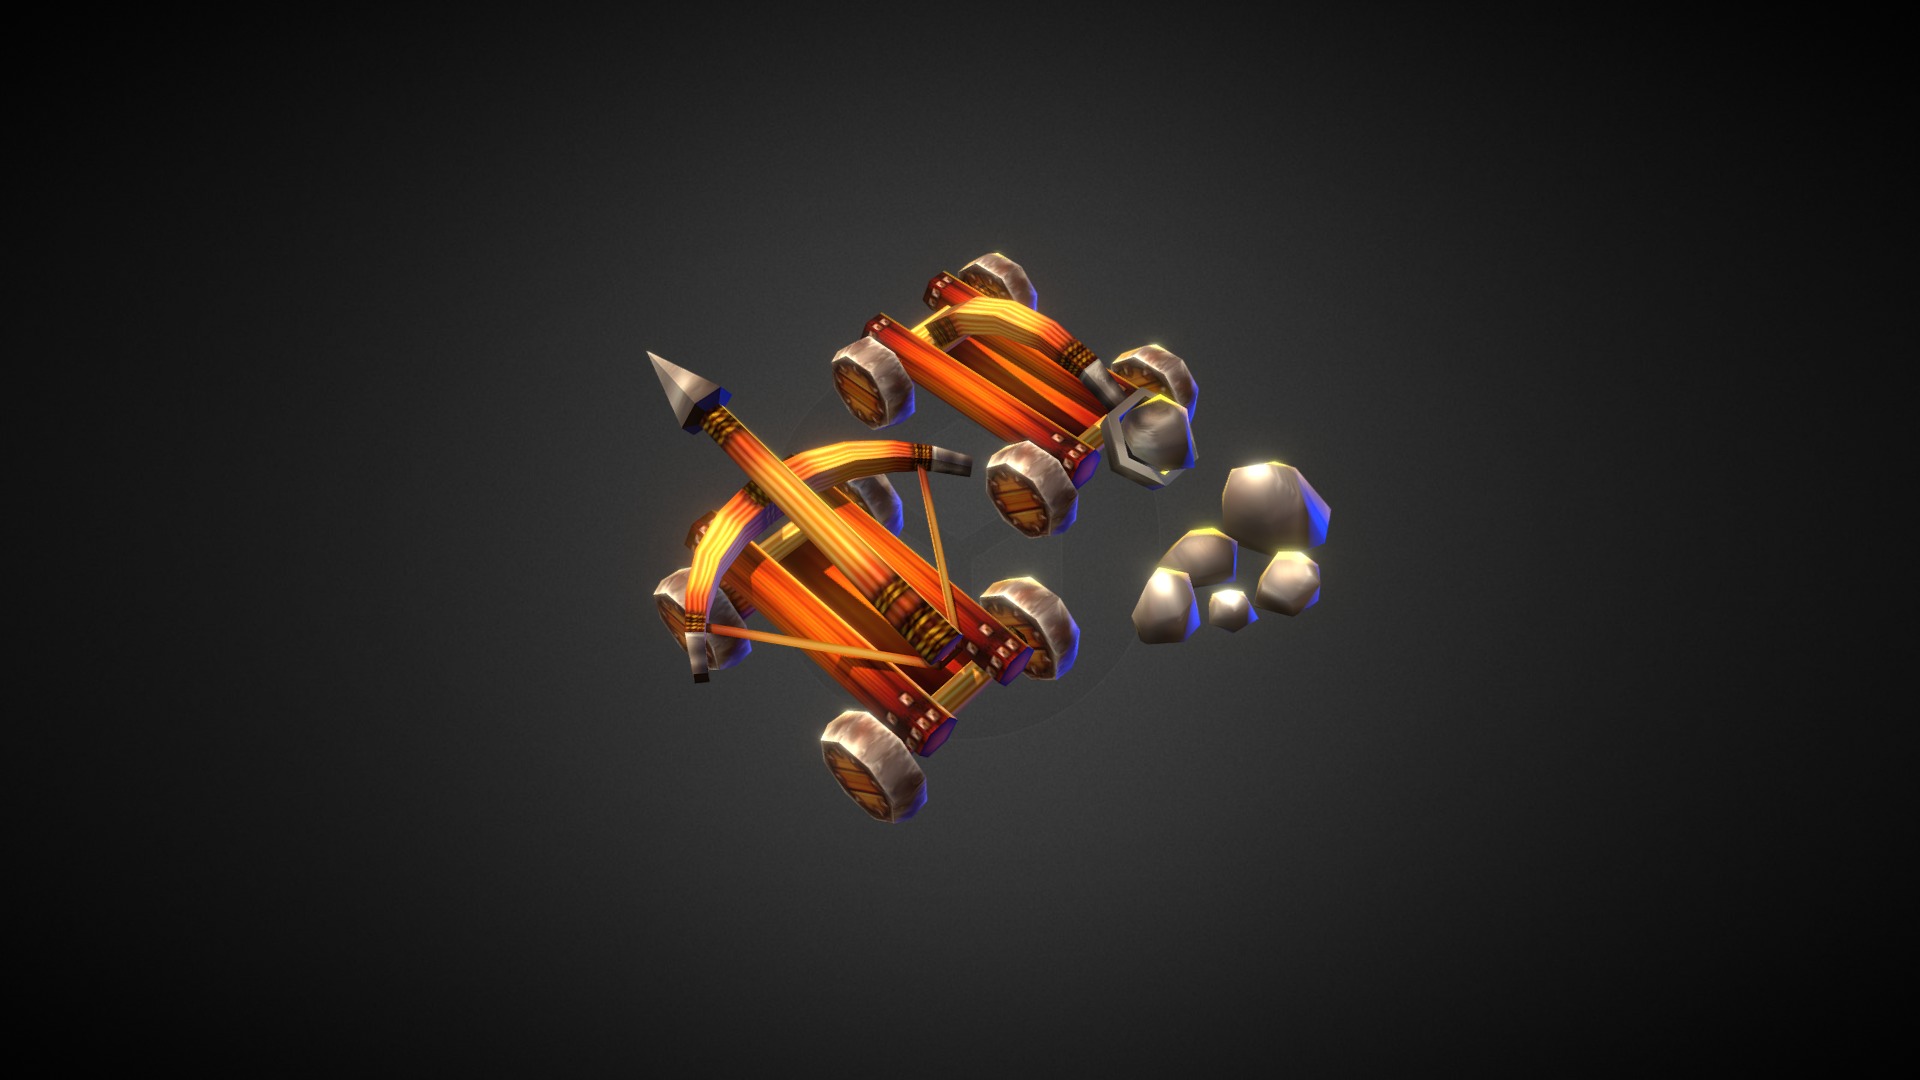 3D model Lowpoly Catapult - This is a 3D model of the Lowpoly Catapult. The 3D model is about a group of light bulbs.